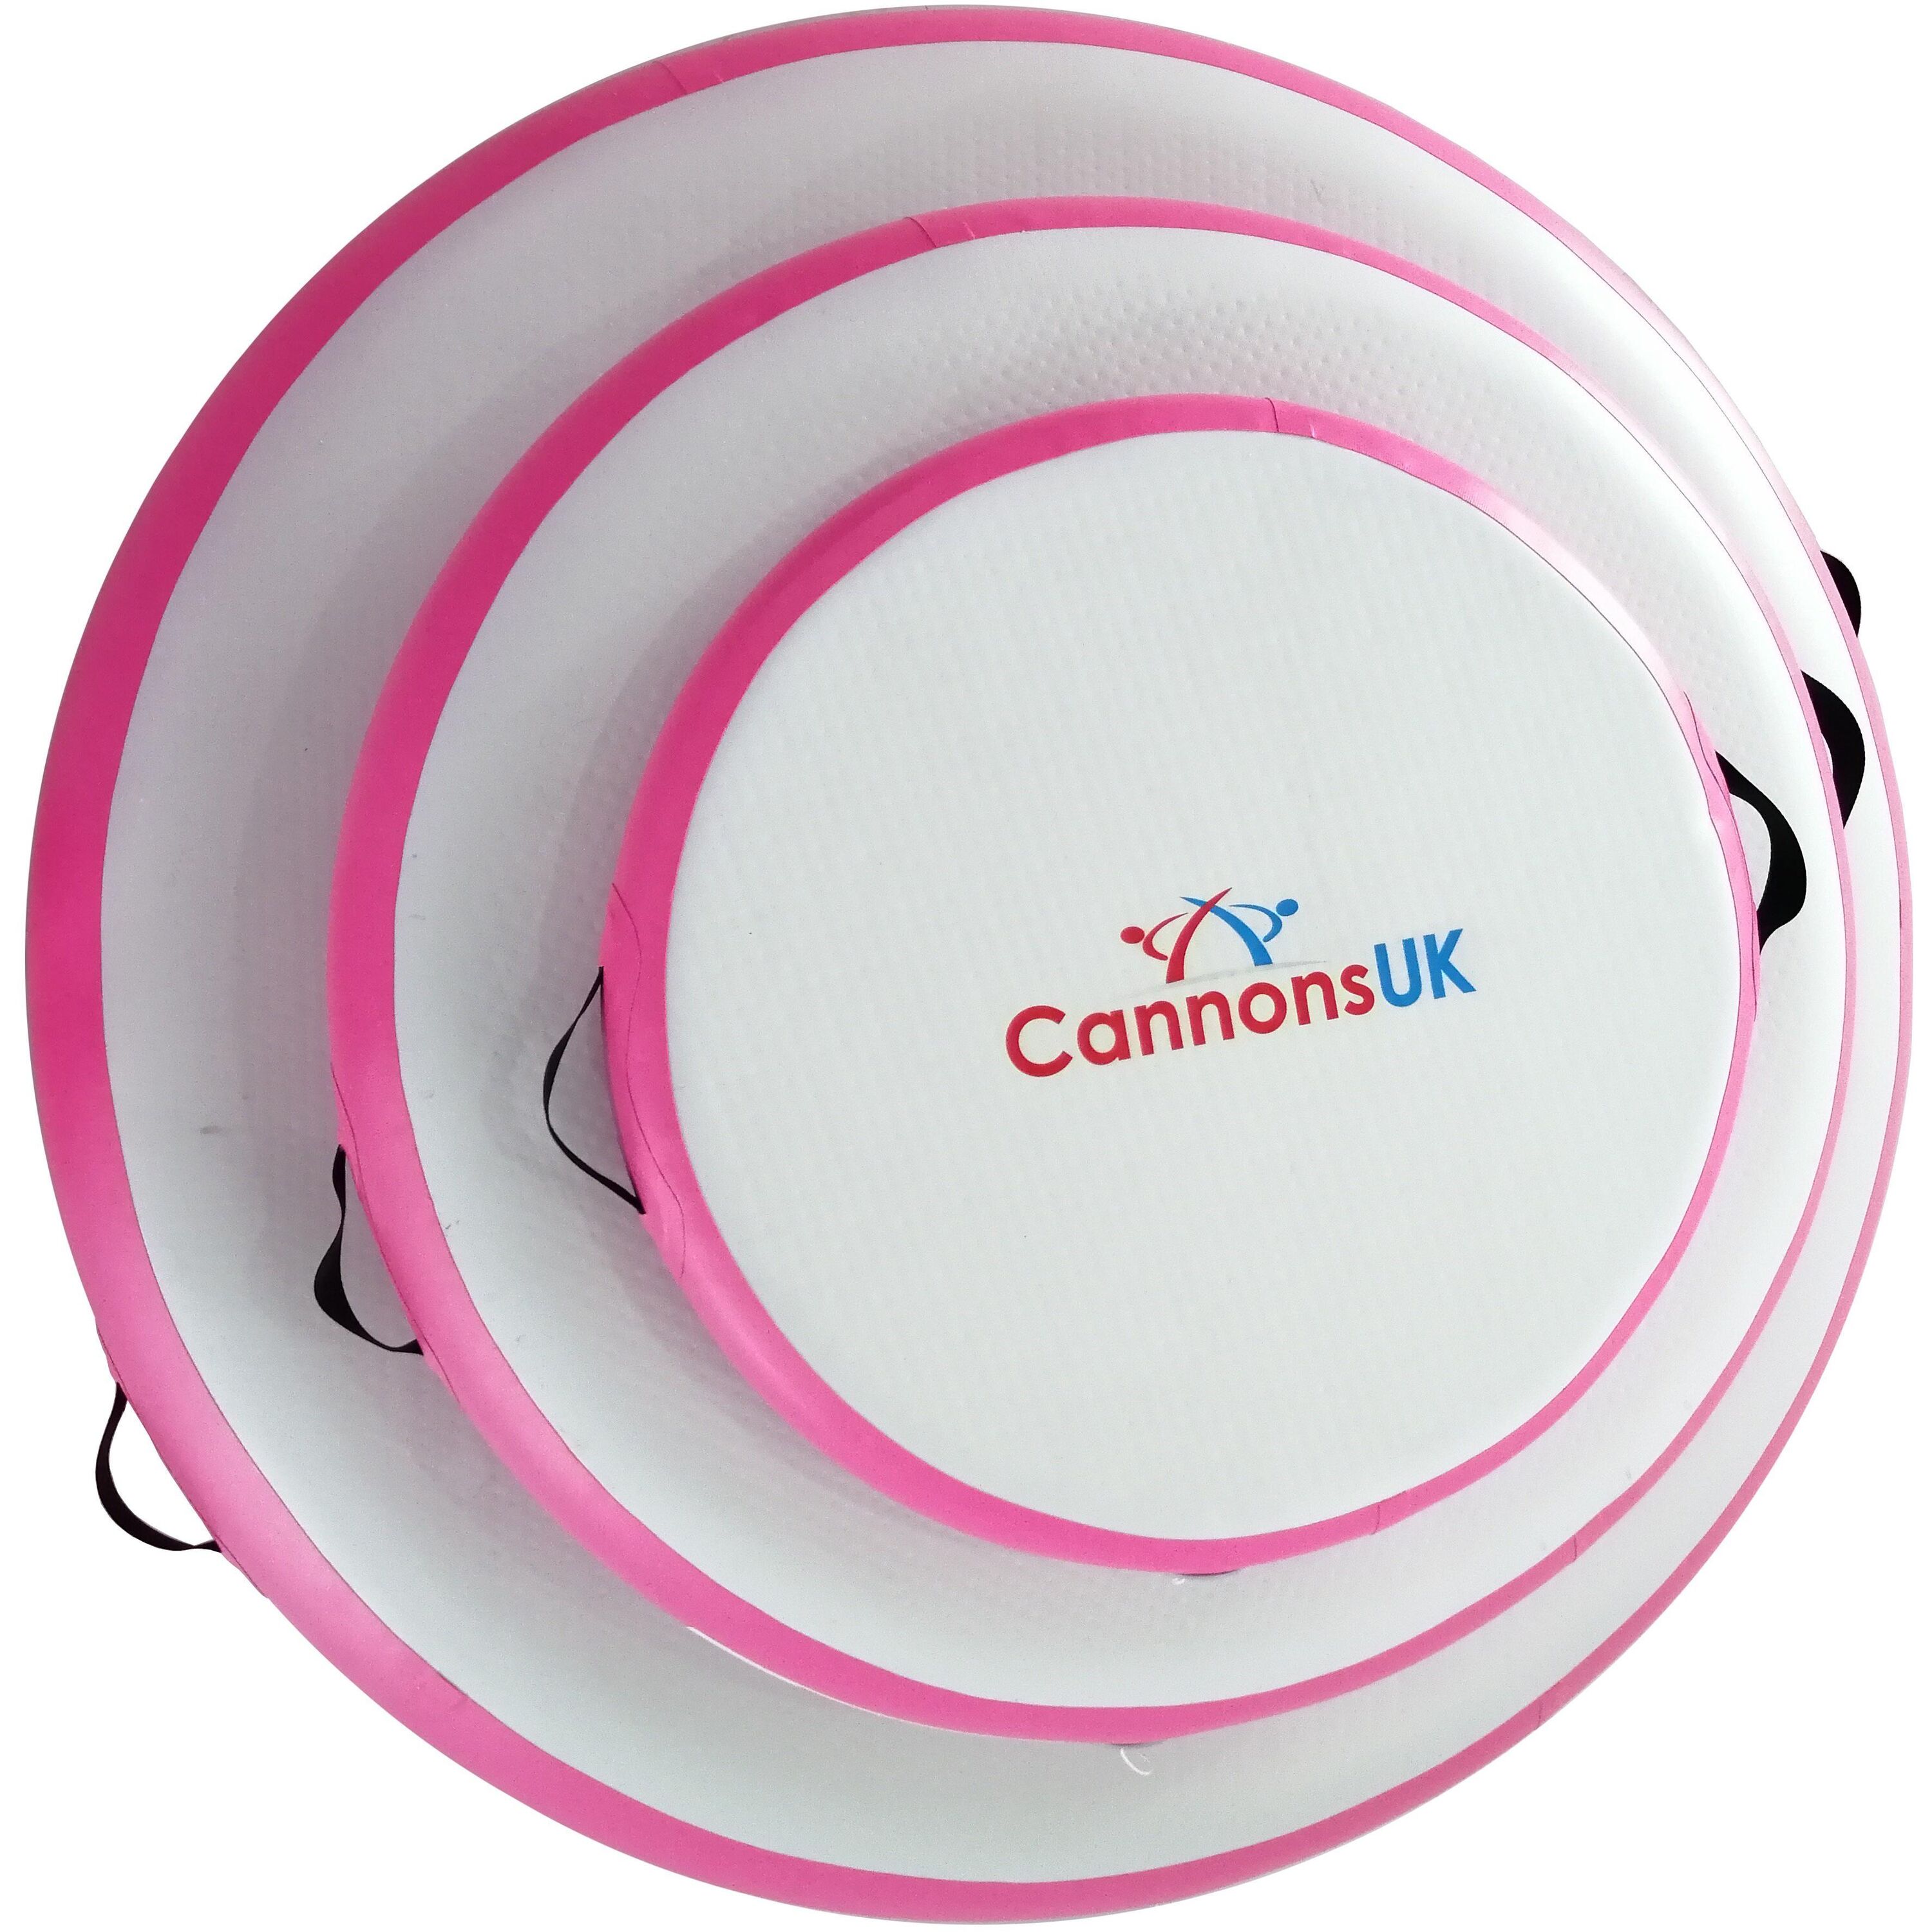 CANNONS UK Cannons UK Air Track Pro Air Spot, Pink, Blue or Rainbow